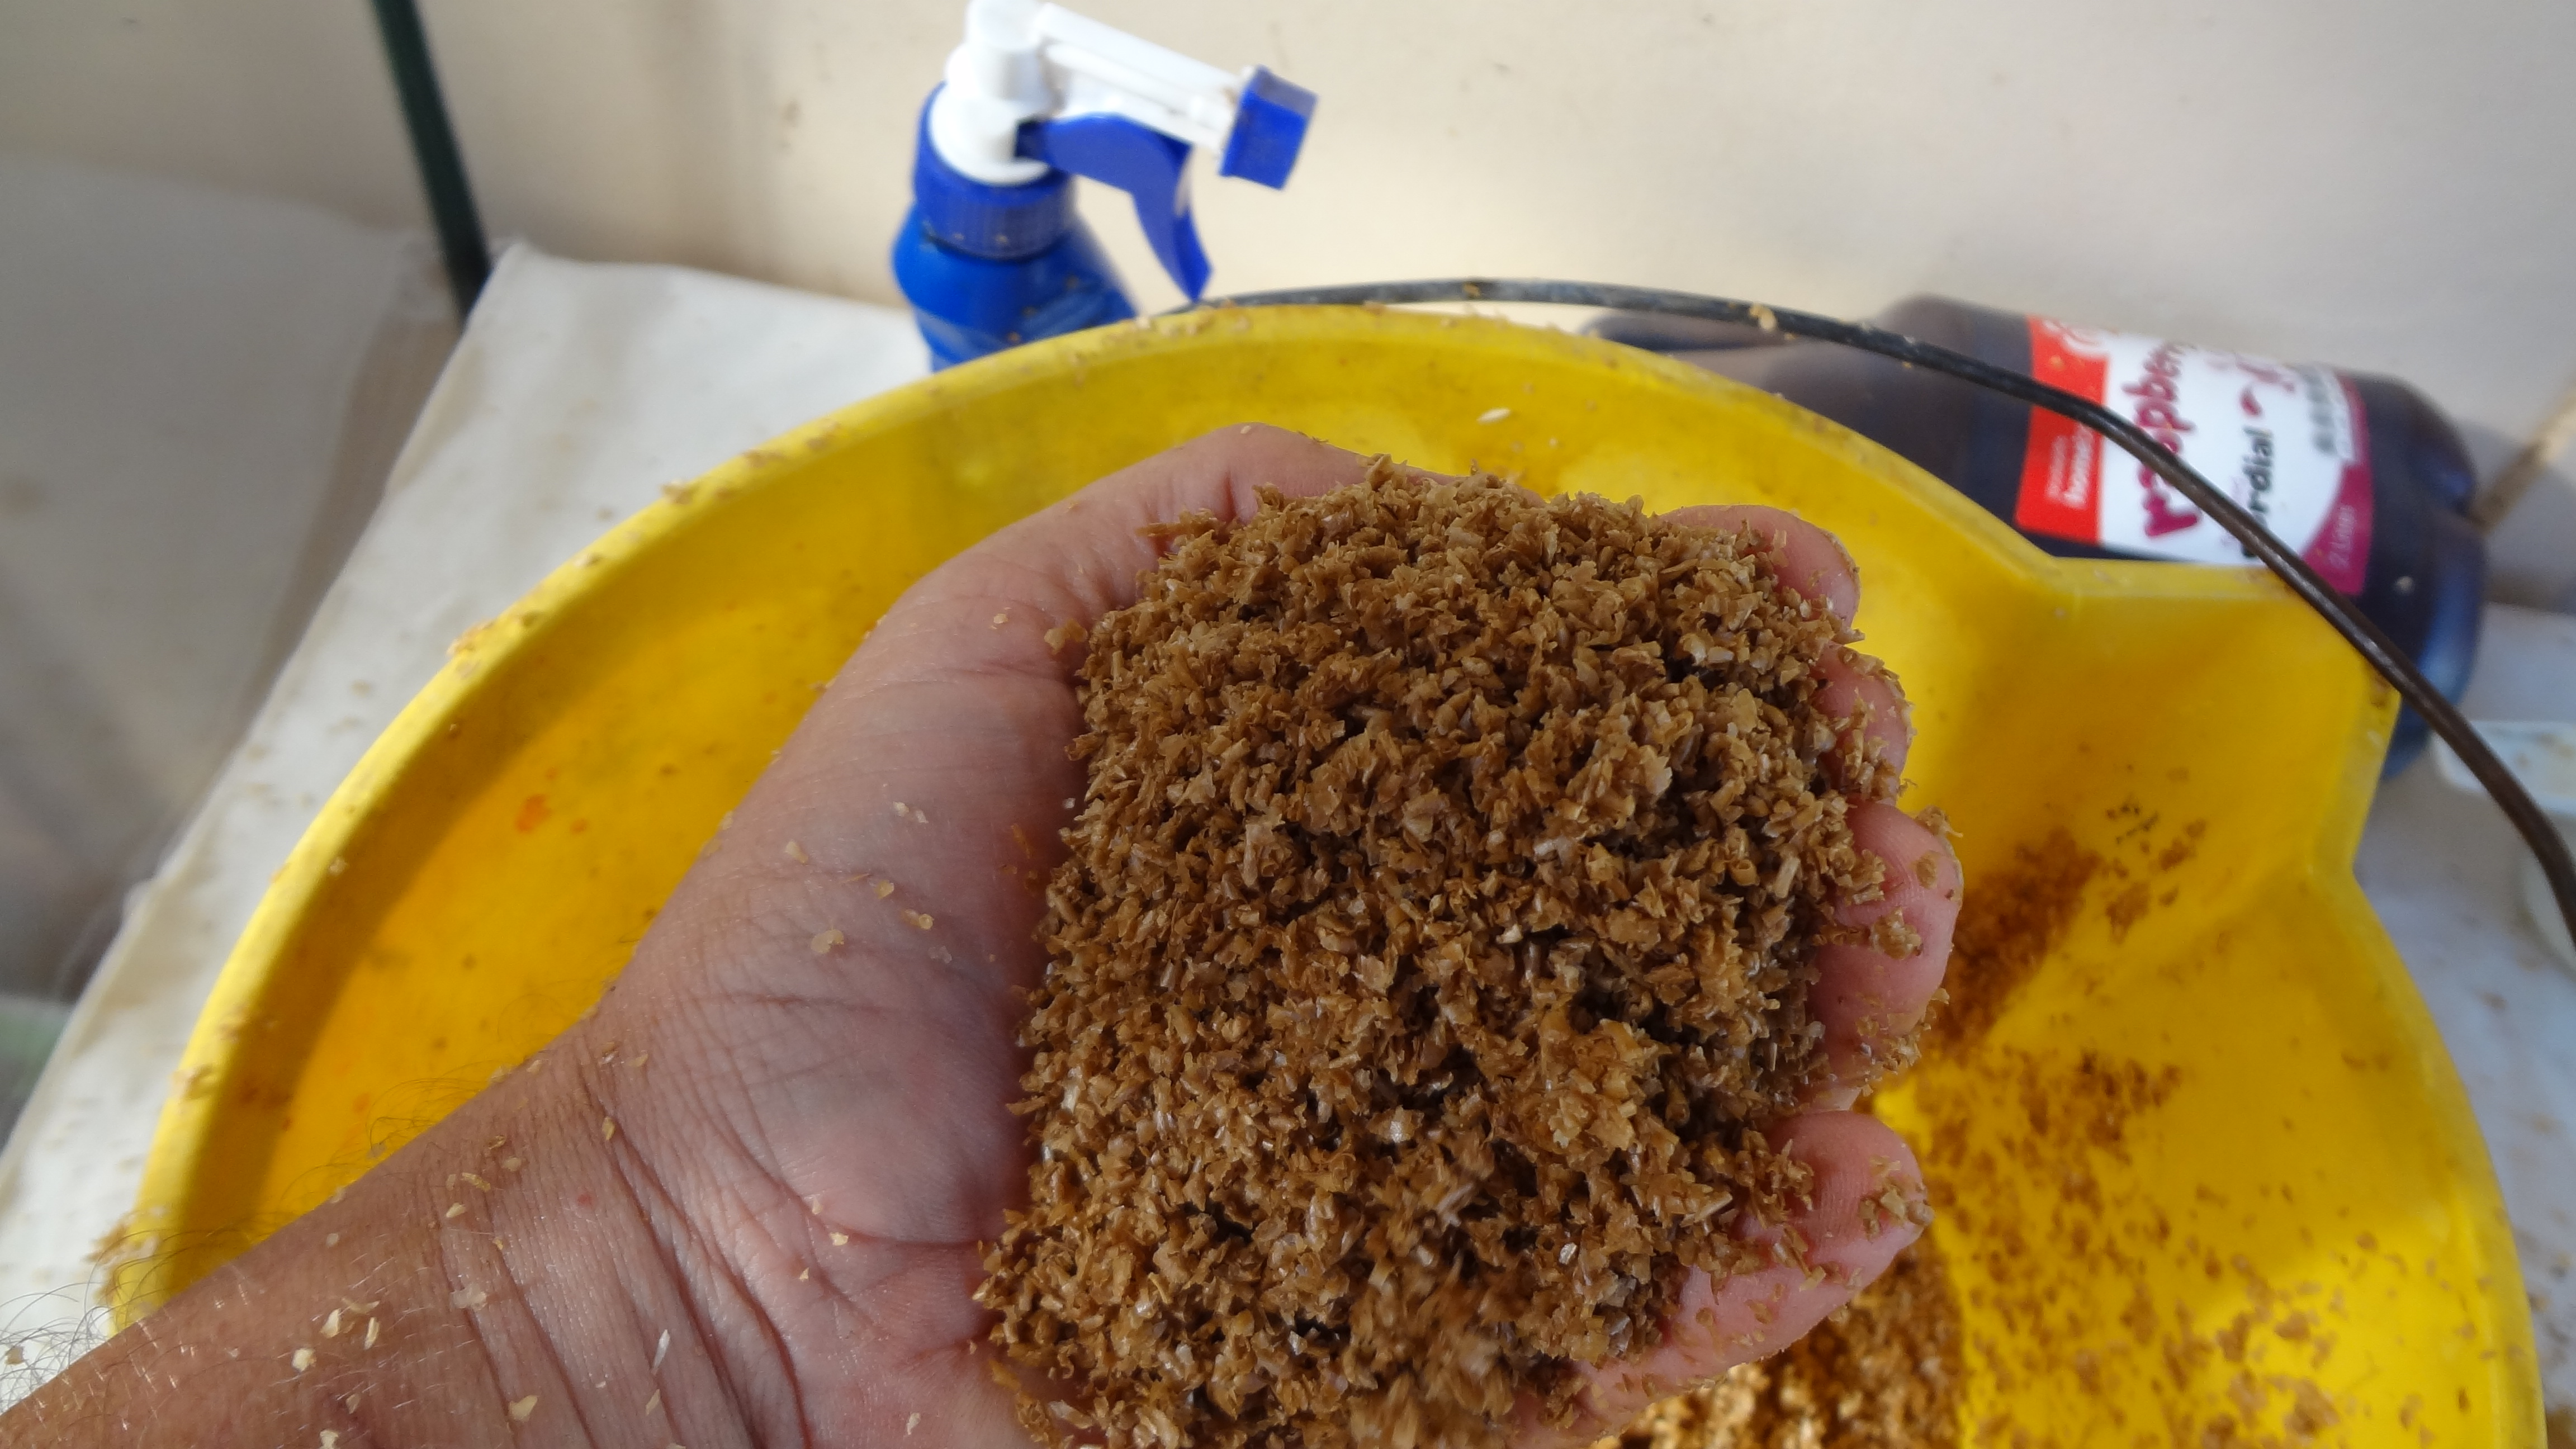 Mix the EM1 solution through the moist bran as thoroughly as possible.